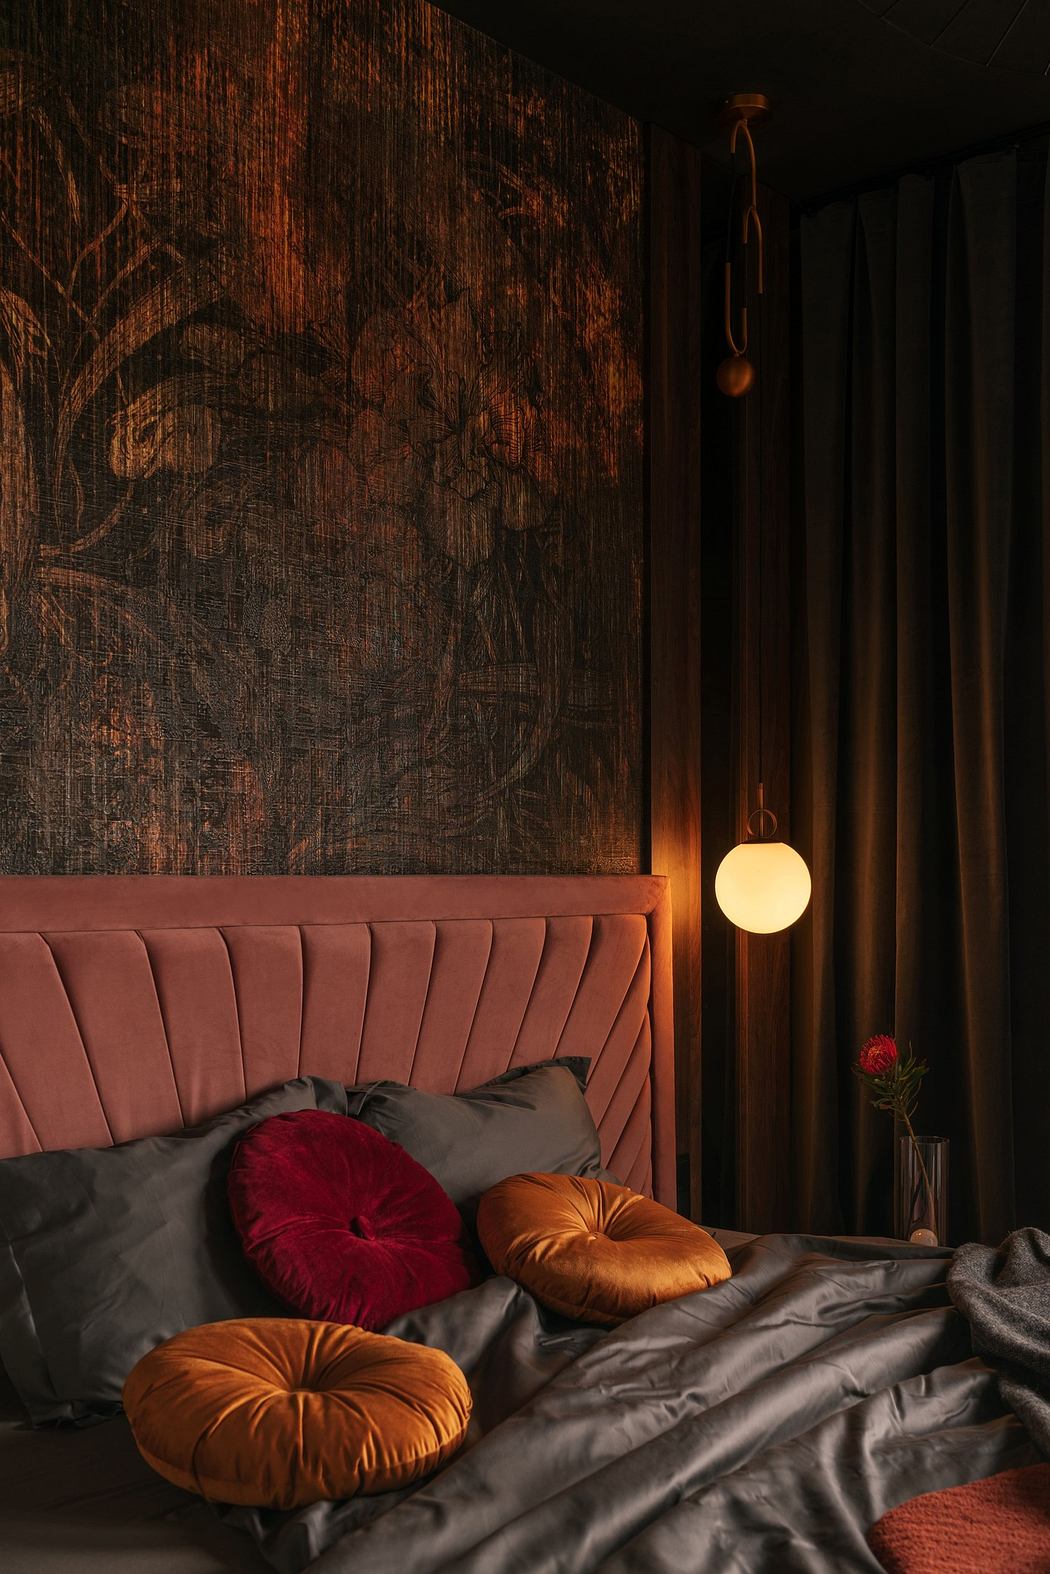 A cozy bedroom corner with a velvet headboard, decorative pillows, and mood lighting